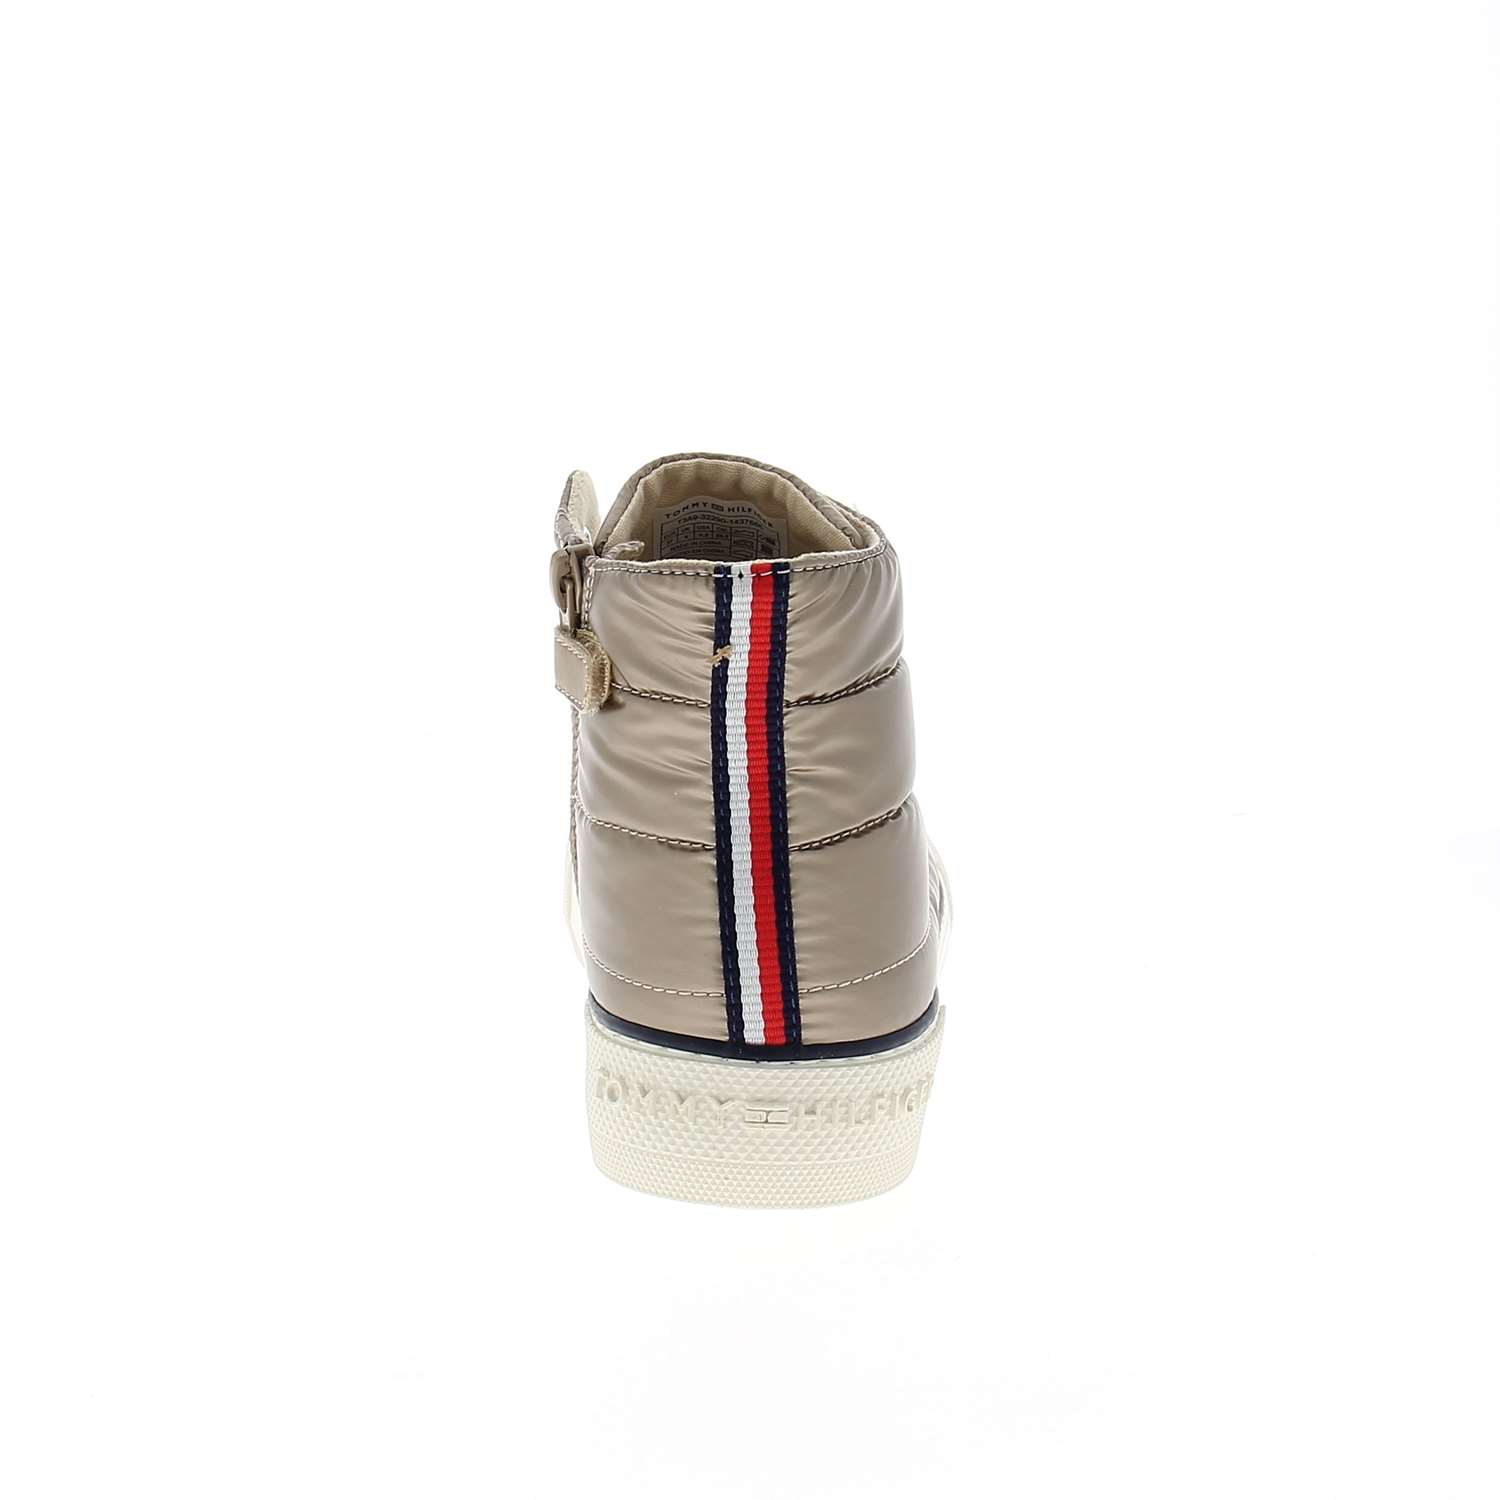 04 - BEVERLY - TOMMY HILFIGER - Baskets - Synthétique